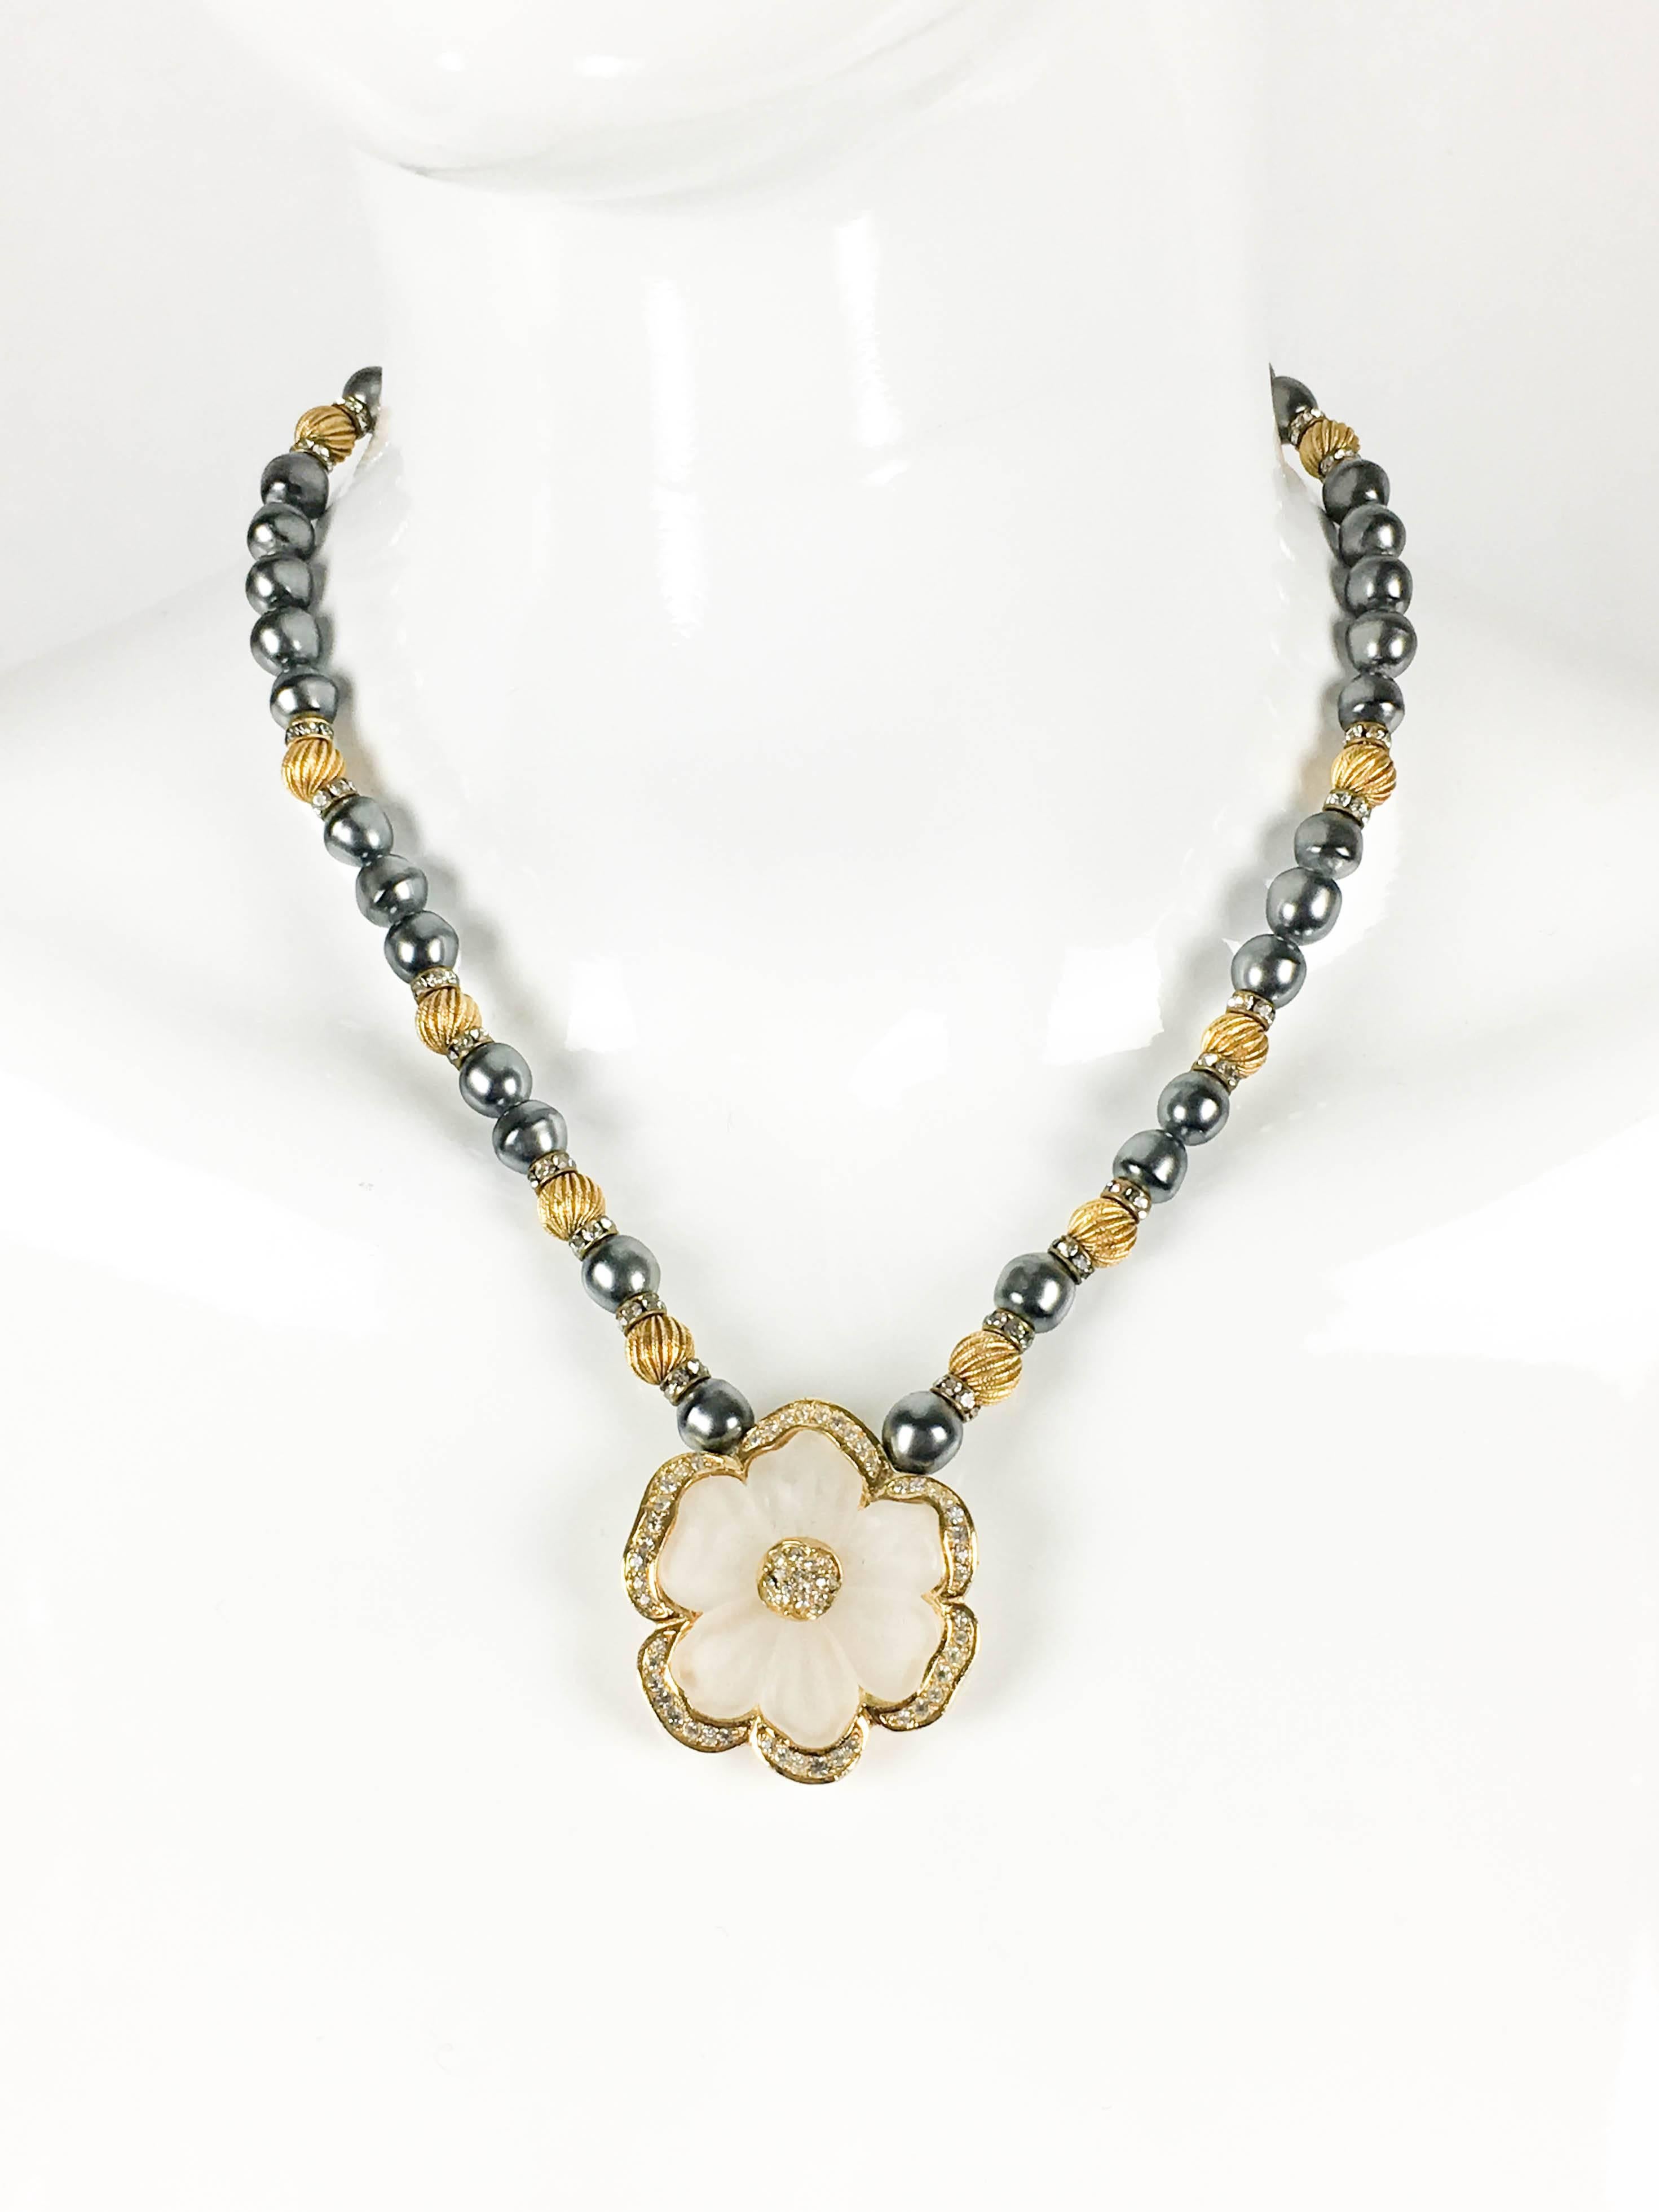 Beautiful Dior Vintage Flower Necklace. This stylish piece by Dior dates back from the 1990’s. It features grey faux pearls, textured golden beads, spaced by paste/rhinestone embellished rings. The main aspect of this necklace is the flower pendant